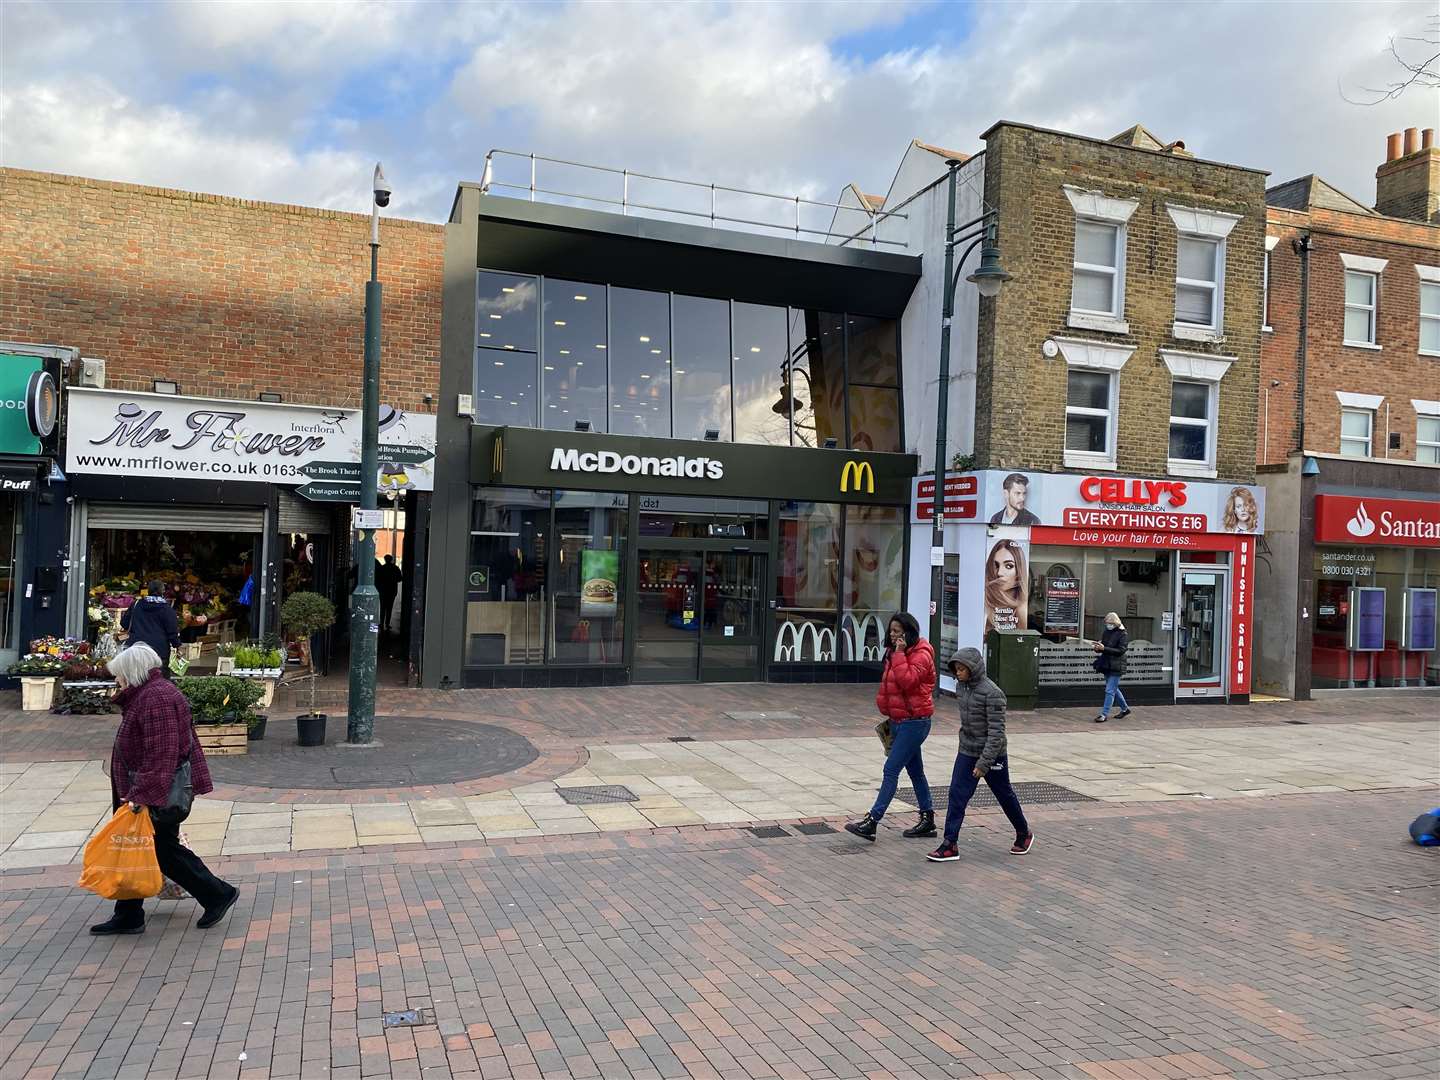 If they work, the guidelines could be extended to other high streets